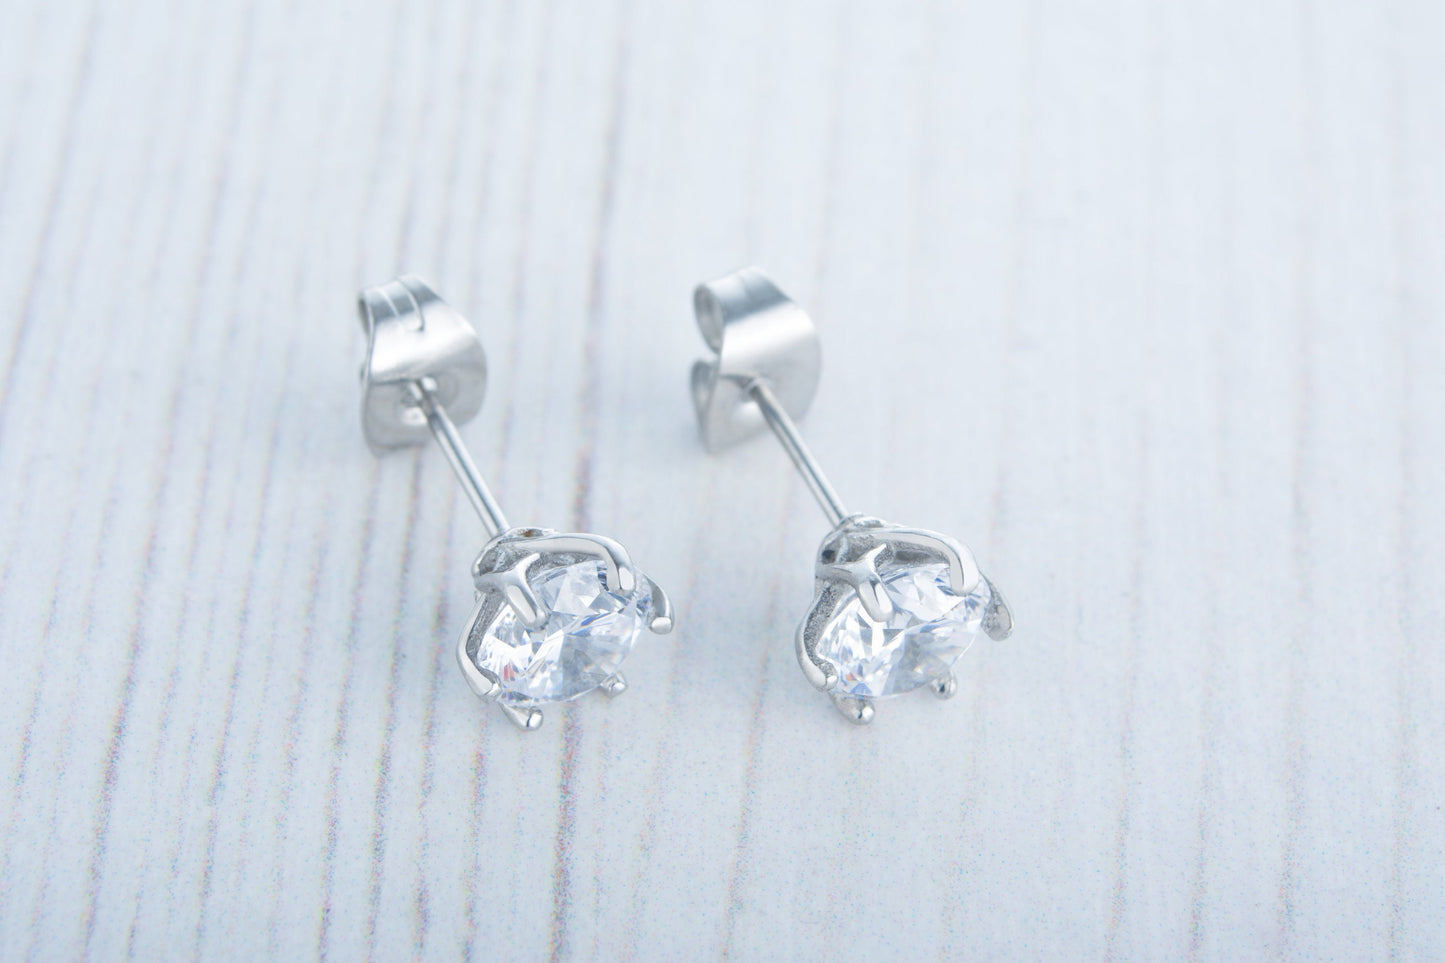 Flower and Hearts Cut Man Made Diamond Simulant stud earrings, available in titanium, white gold and surgical steel 4mm, 5mm or 6mm sizes